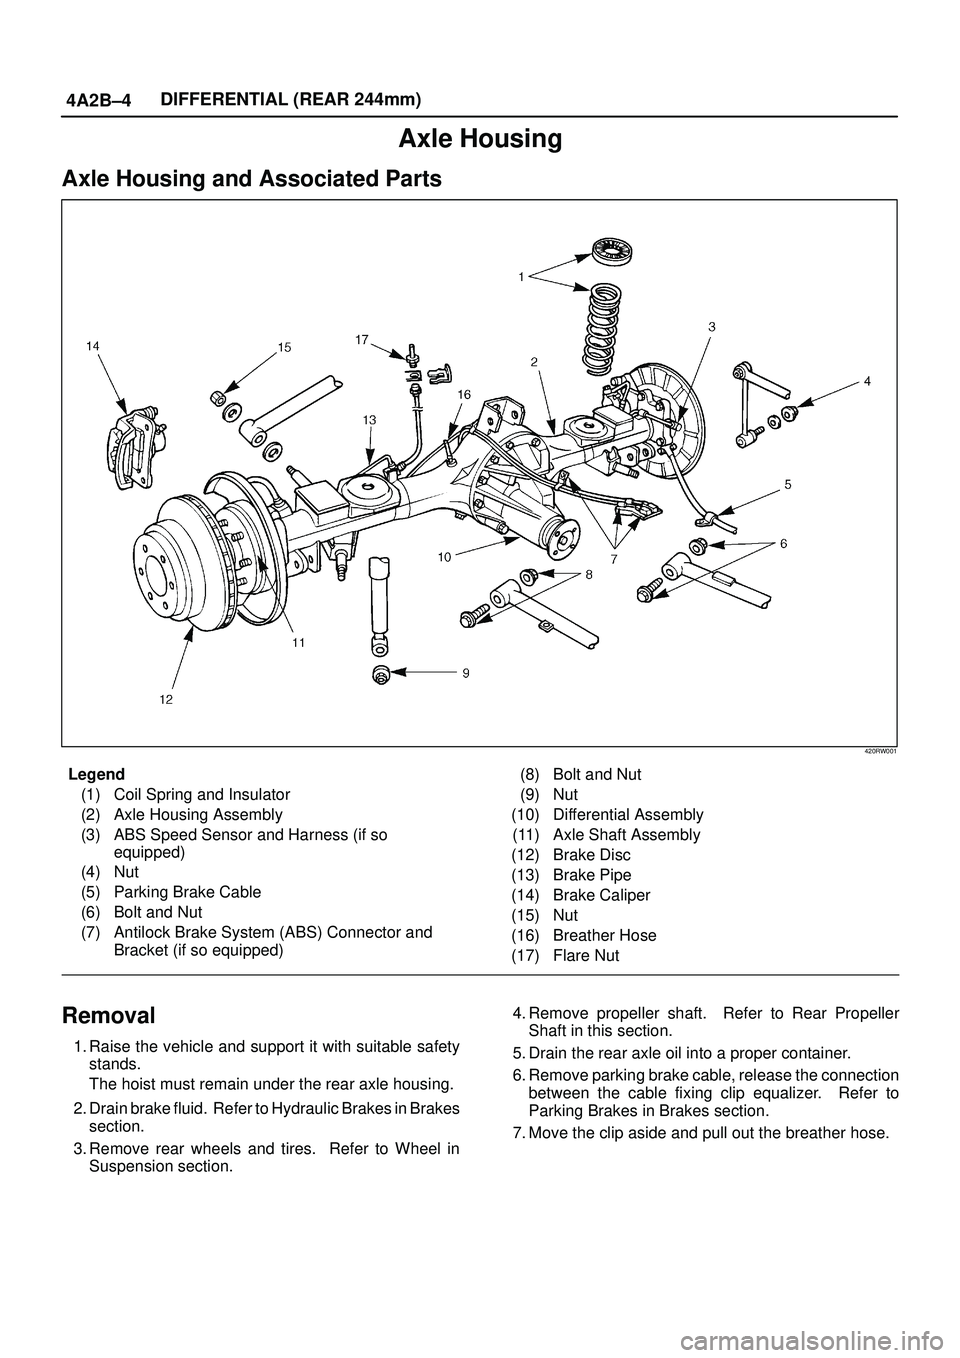 ISUZU TROOPER 1998  Service Repair Manual 4A2B±4DIFFERENTIAL (REAR 244mm)
Axle Housing
Axle Housing and Associated Parts
420RW001
Legend
(1) Coil Spring and Insulator
(2) Axle Housing Assembly
(3) ABS Speed Sensor and Harness (if so
equipped